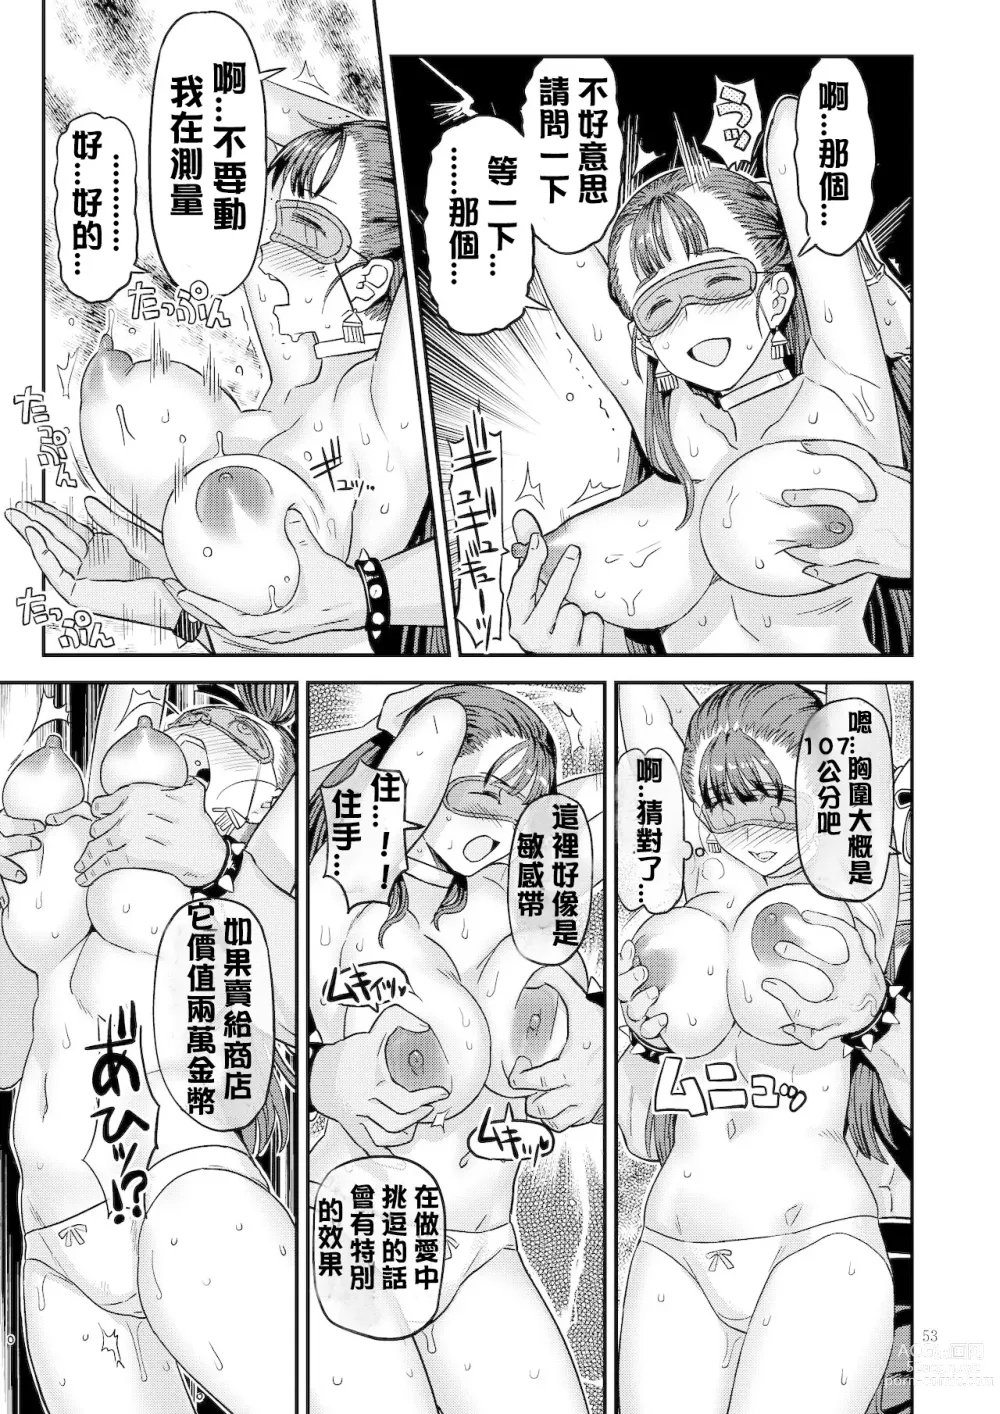 Page 10 of doujinshi Dragon Quest One Thousand and One Nights (Dragon Quest) [Digital]  【Chinese】【QTE中文翻譯】